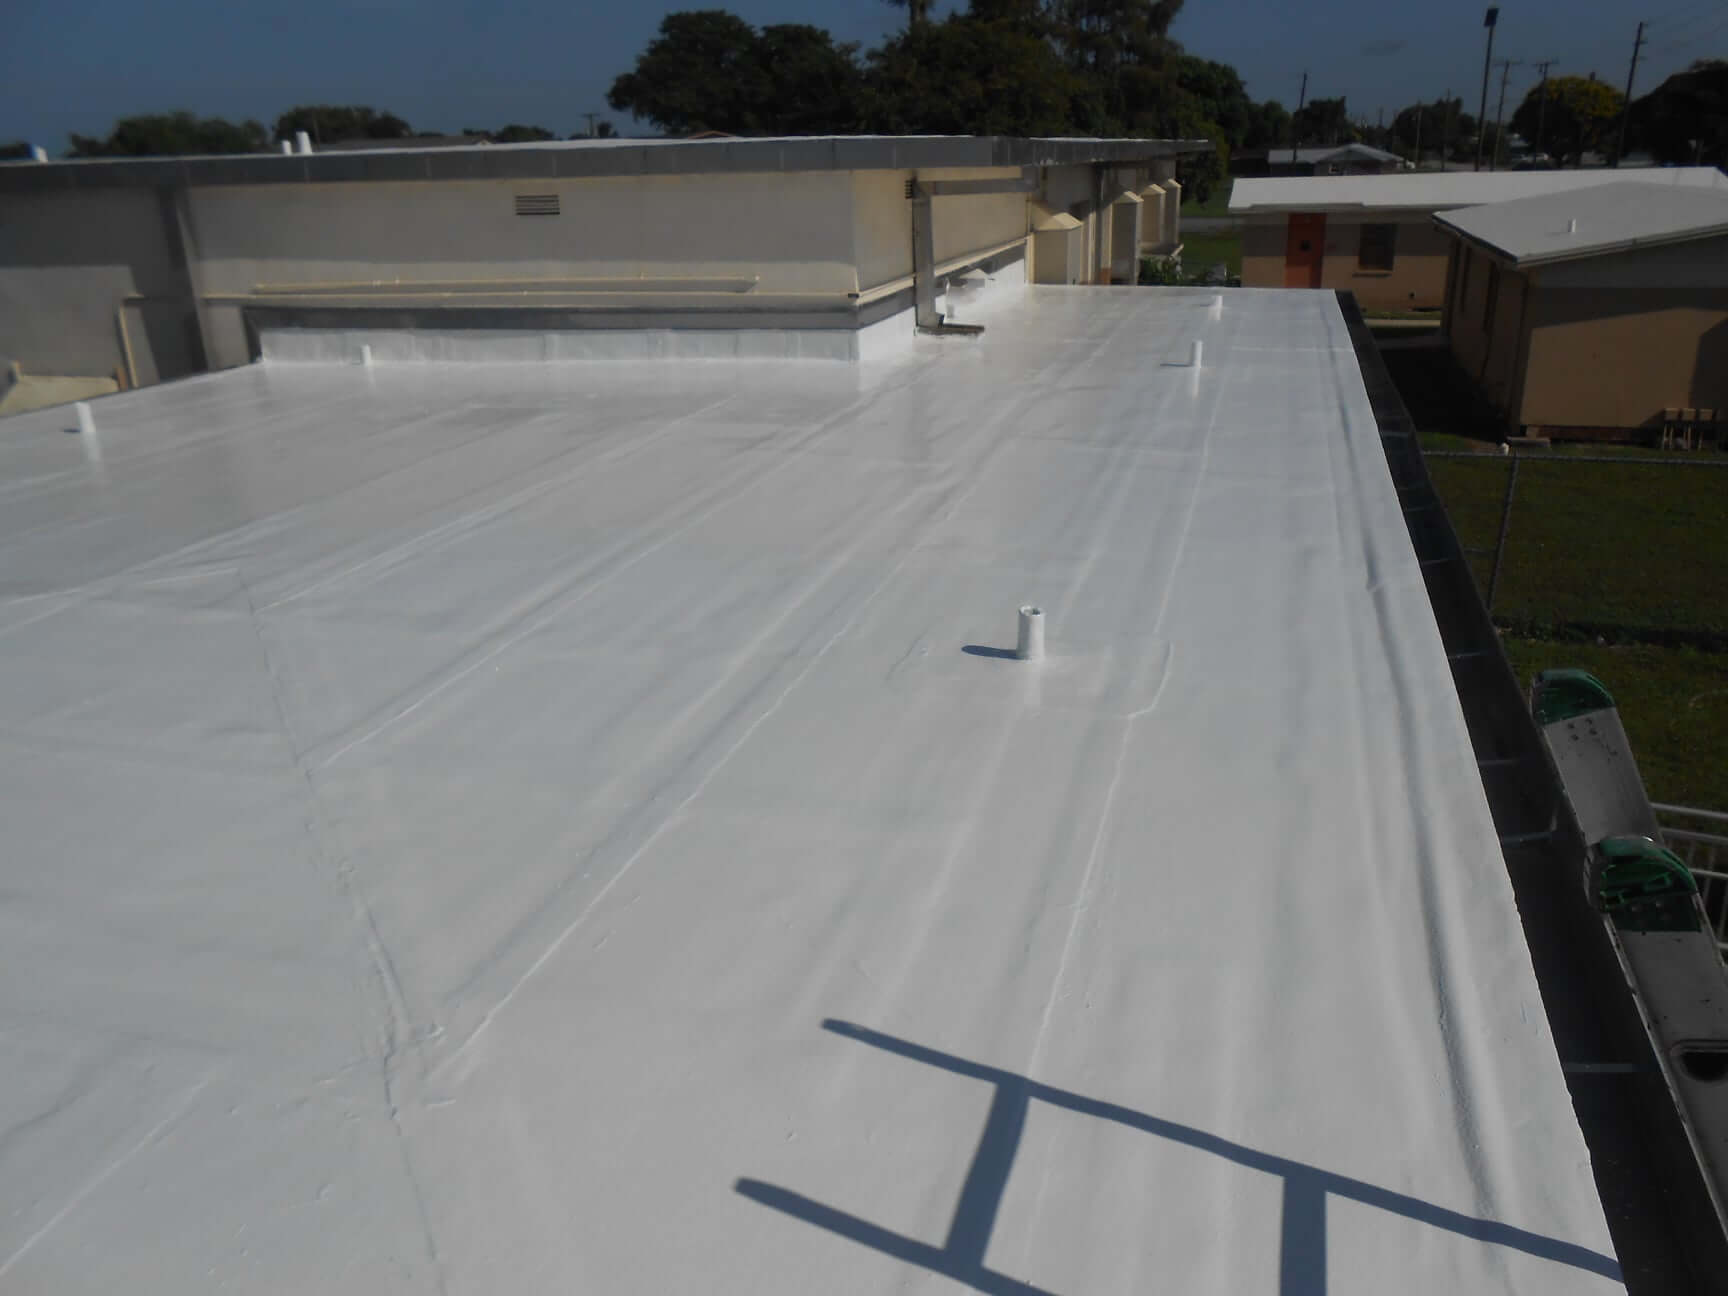 Roof replacement | Roofing Concepts Unlimited